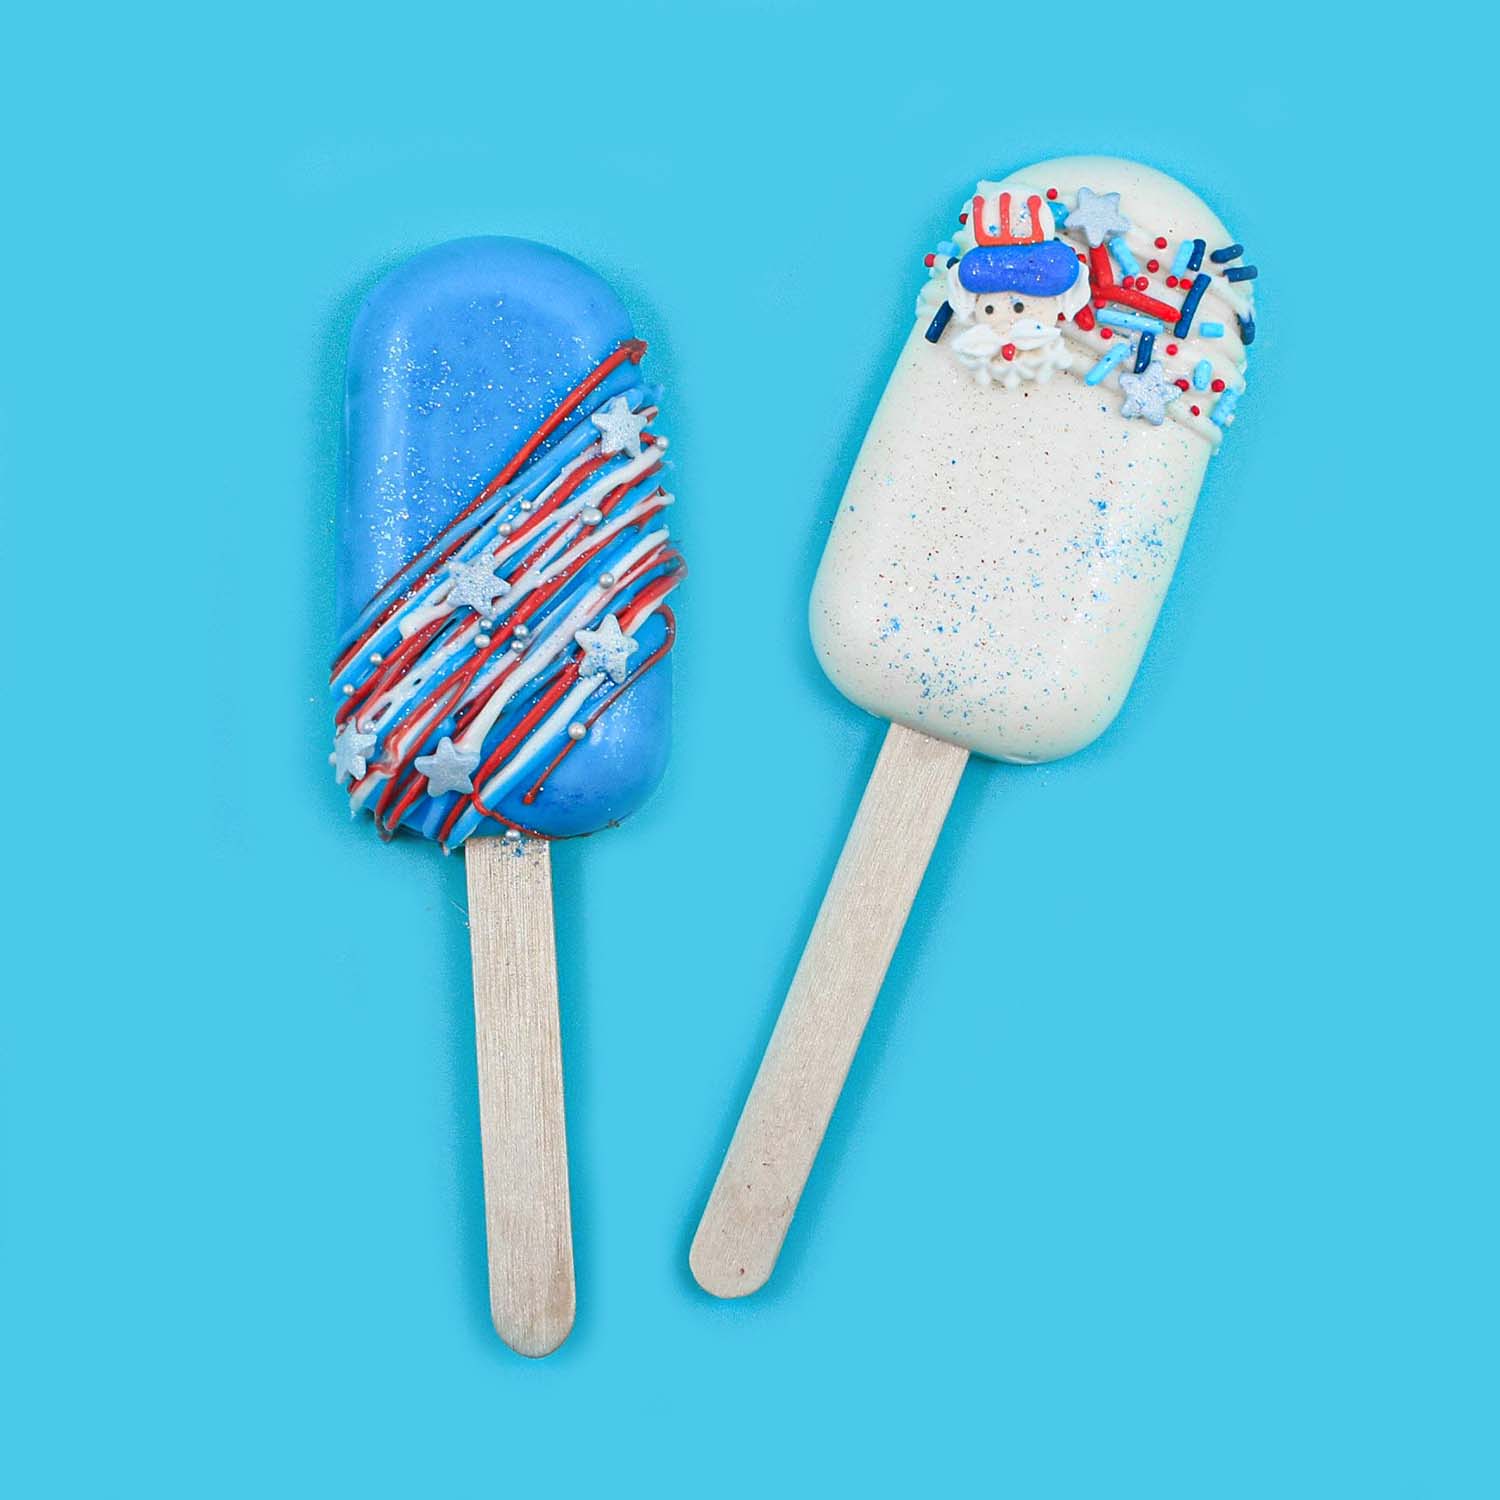 Blue cakesicle with red, white and blue drizzle, silver nonpareil and star sprinkels. White cakesicle with white chocolate drizzle, red white and silver jimmies and nonpareils and stars and uncle sam layons.